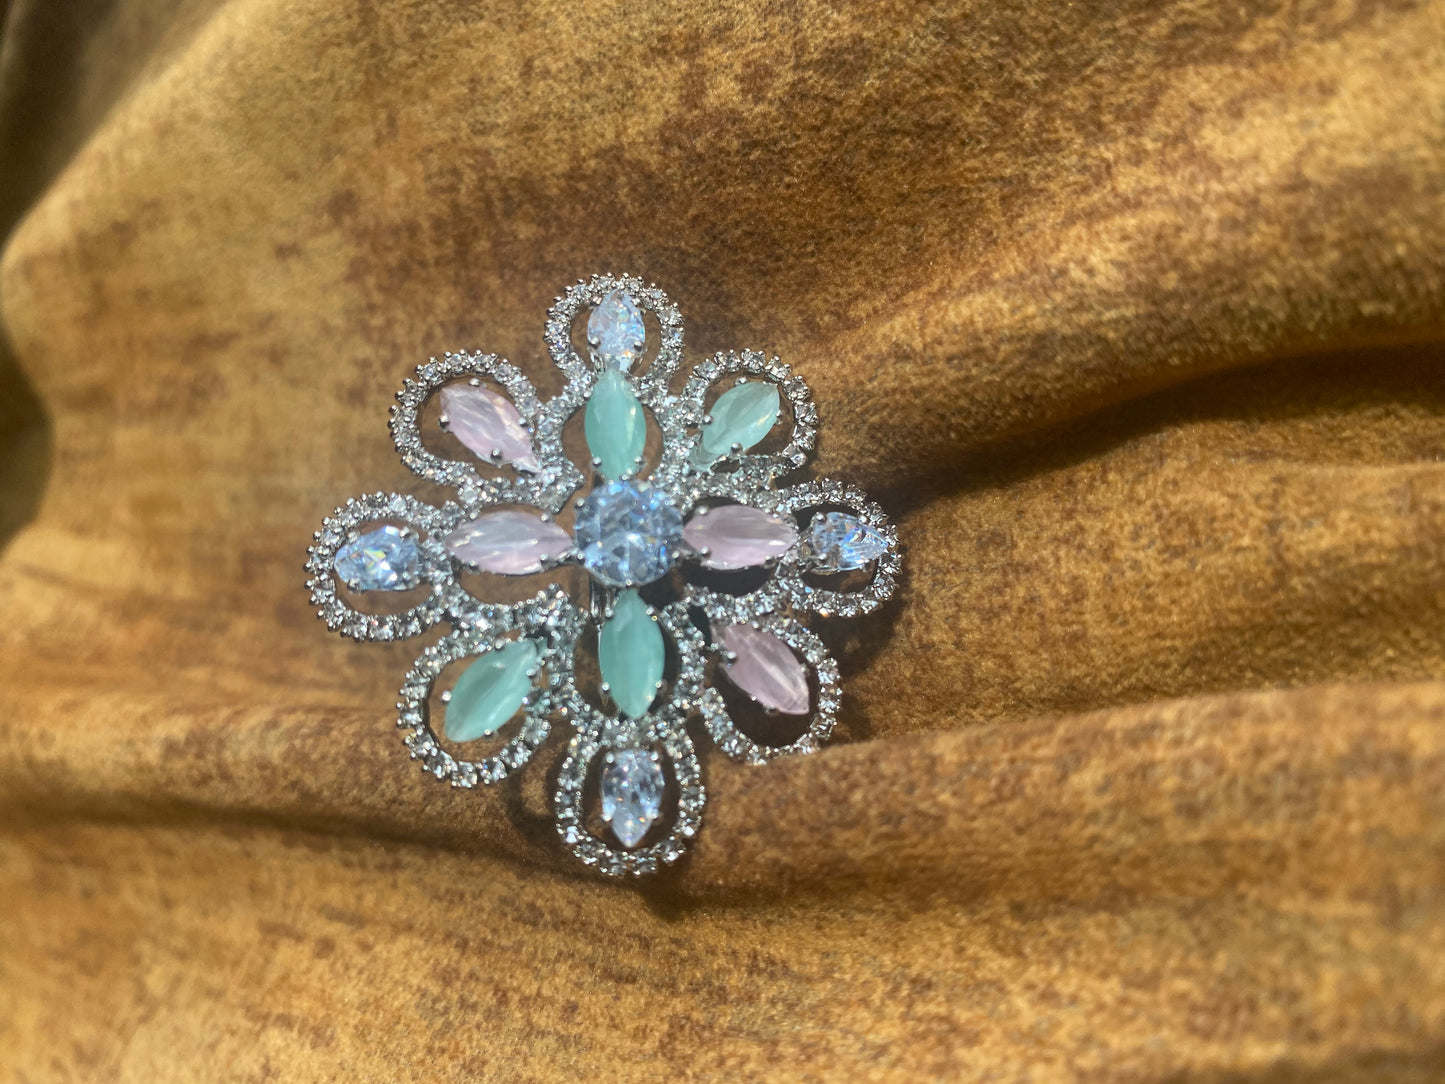 Adjustable American Diamond Cocktail Ring- Pink and Mint Green Pastel Colors with Silver Touch Medium Size